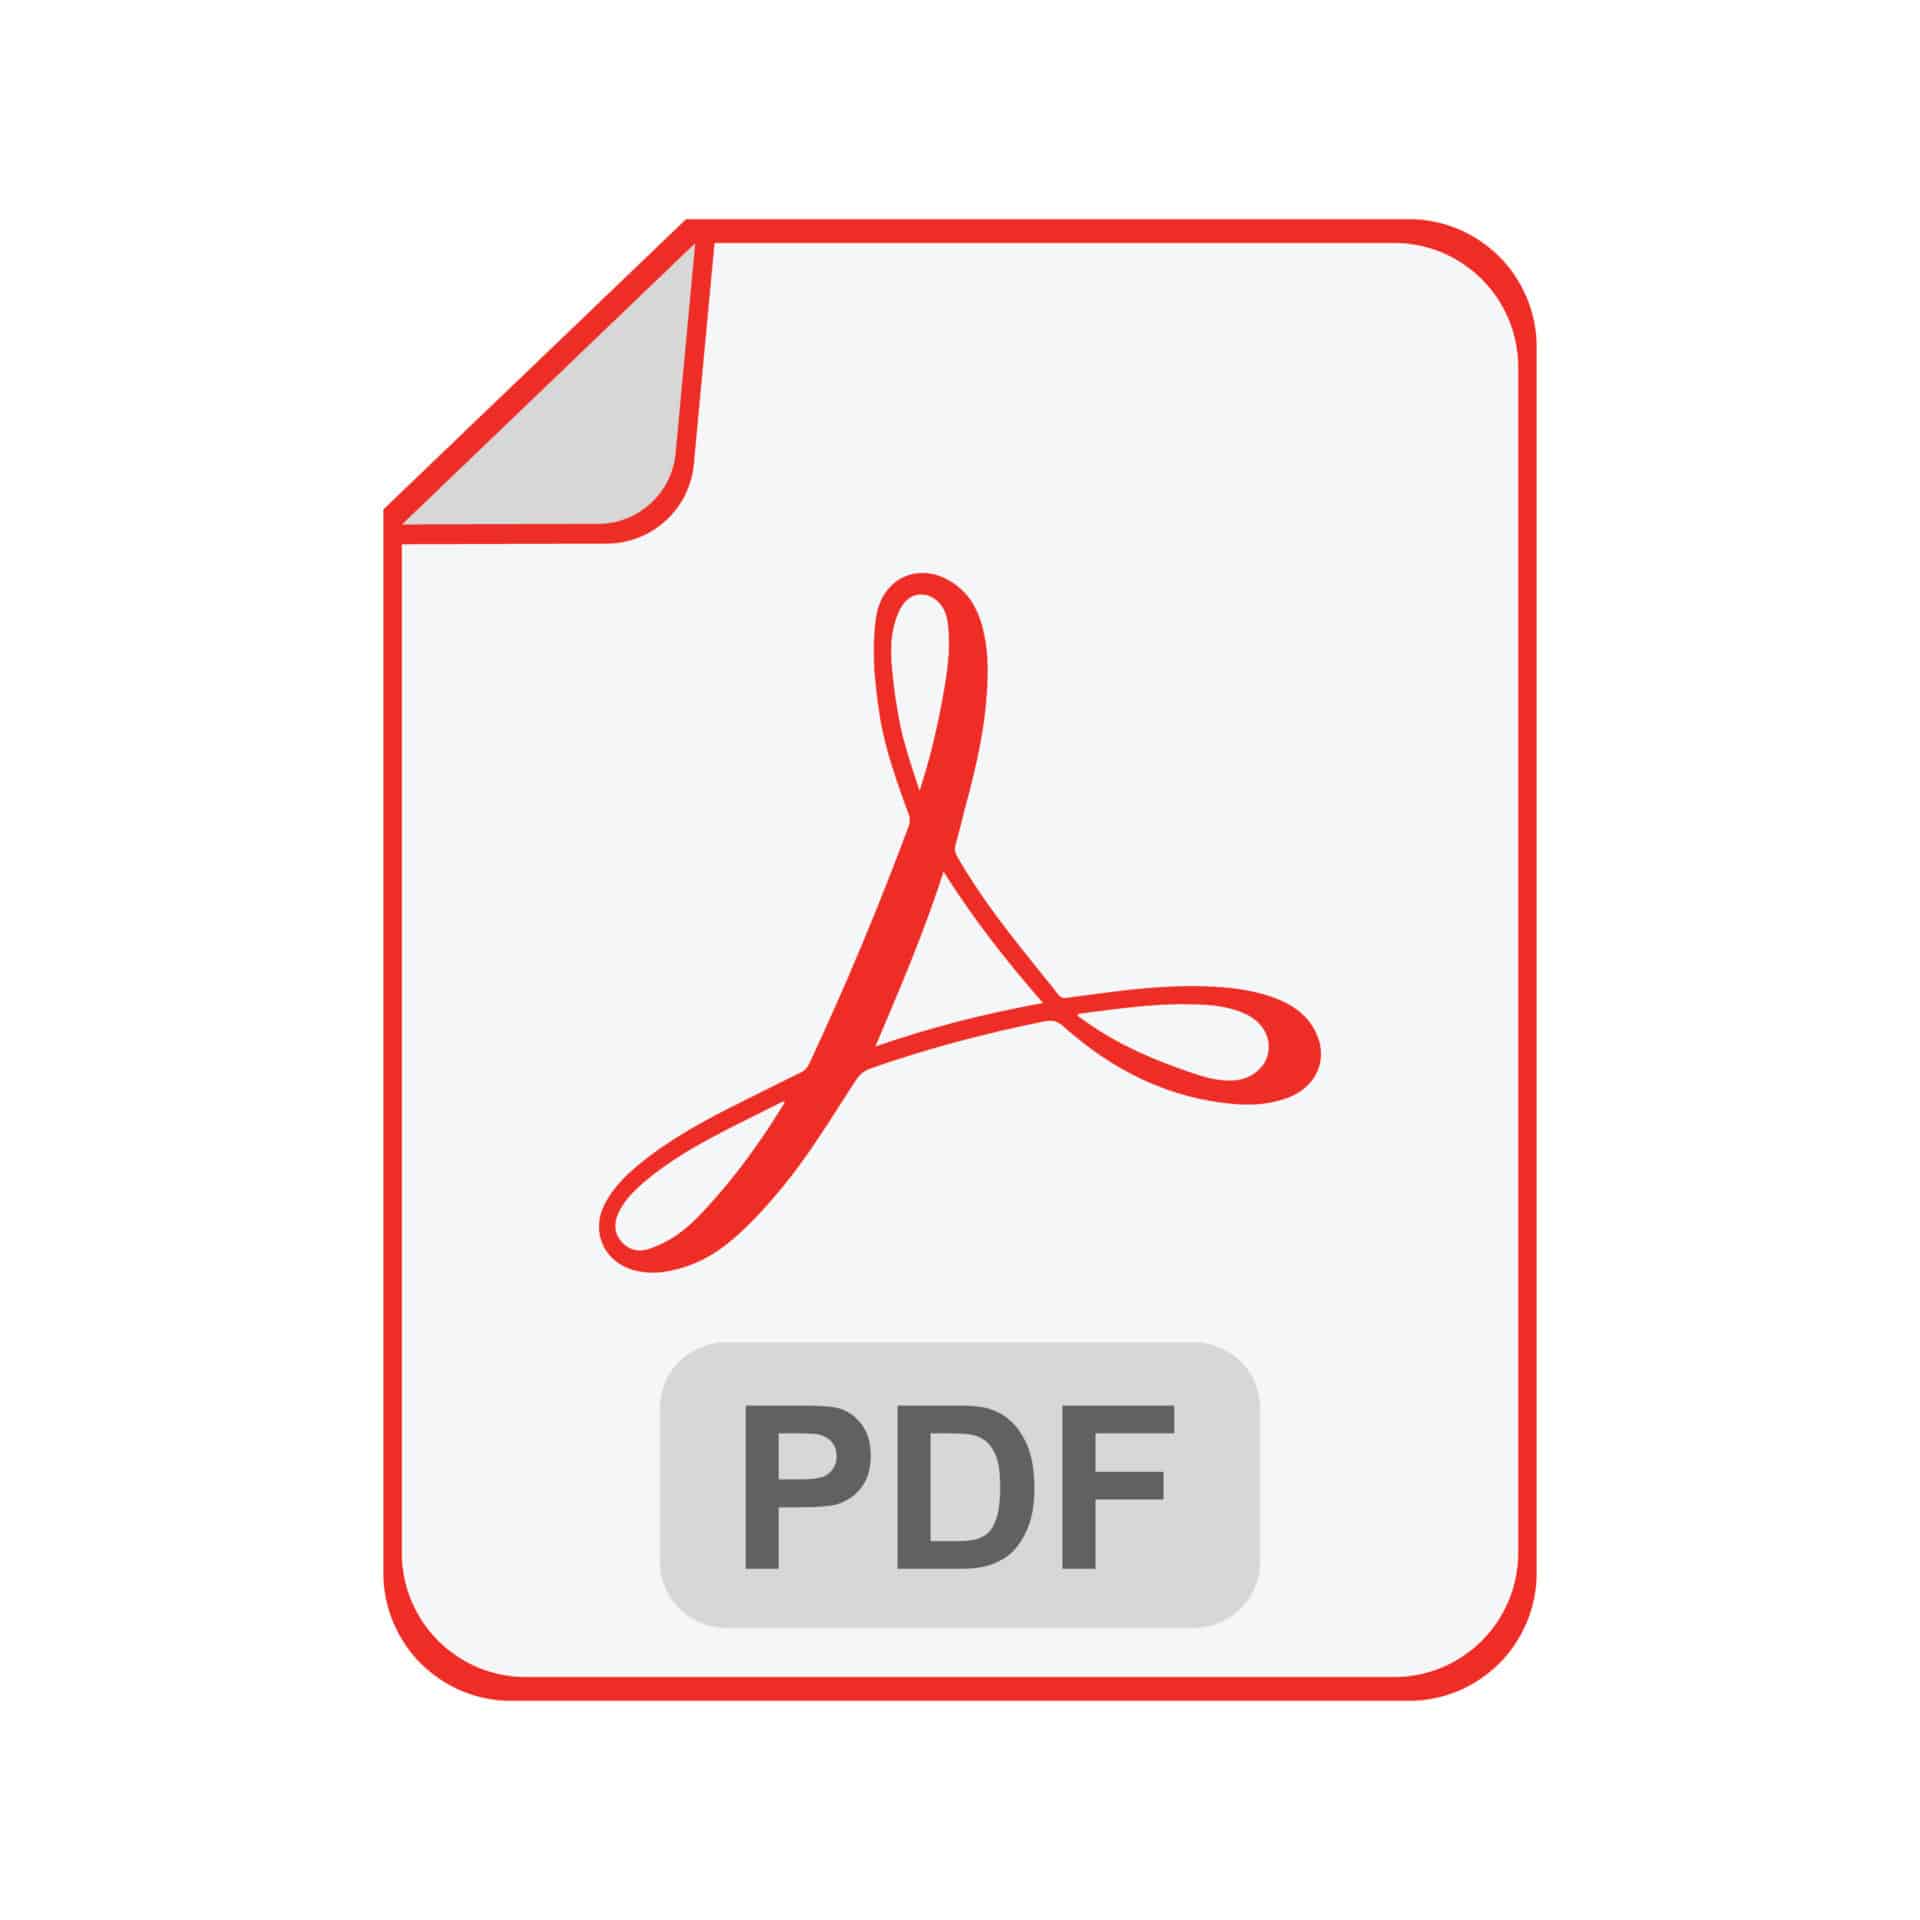 file-type-icons-format-and-extension-of-documents-pdf-icon-free-vector